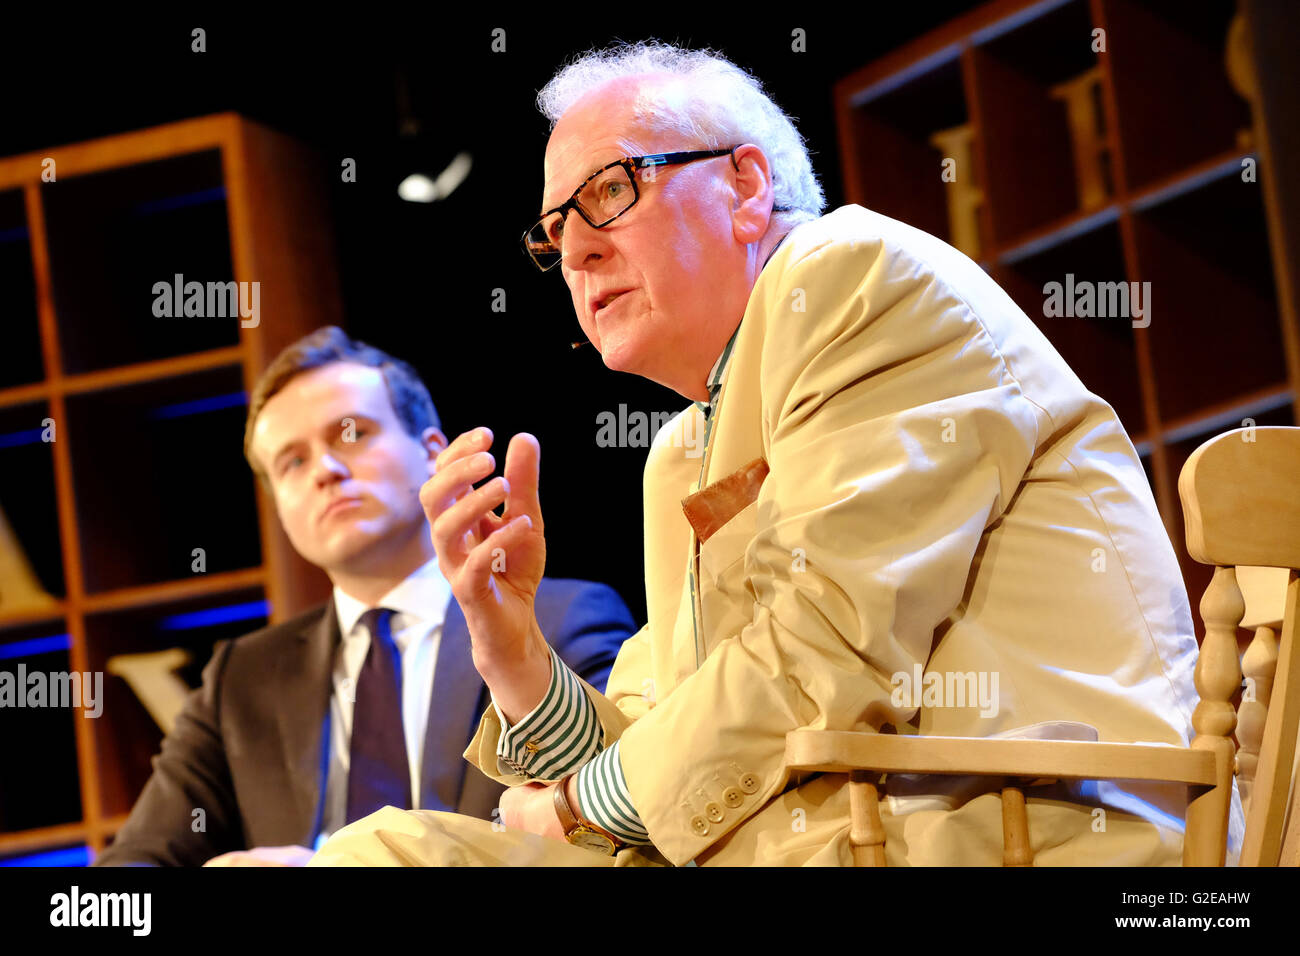 Hay on Wye, Wales, UK. 29th May, 2016. Authors Peter Hennessy ( right ) and James Jinks ( behind ) on stage talking about their new book The Silent Deep an authorative history of Britain's Submarine Service since the Second World War. The Hay Festival continues to 5th June. Photograph Steven May / Alamy Live News Stock Photo